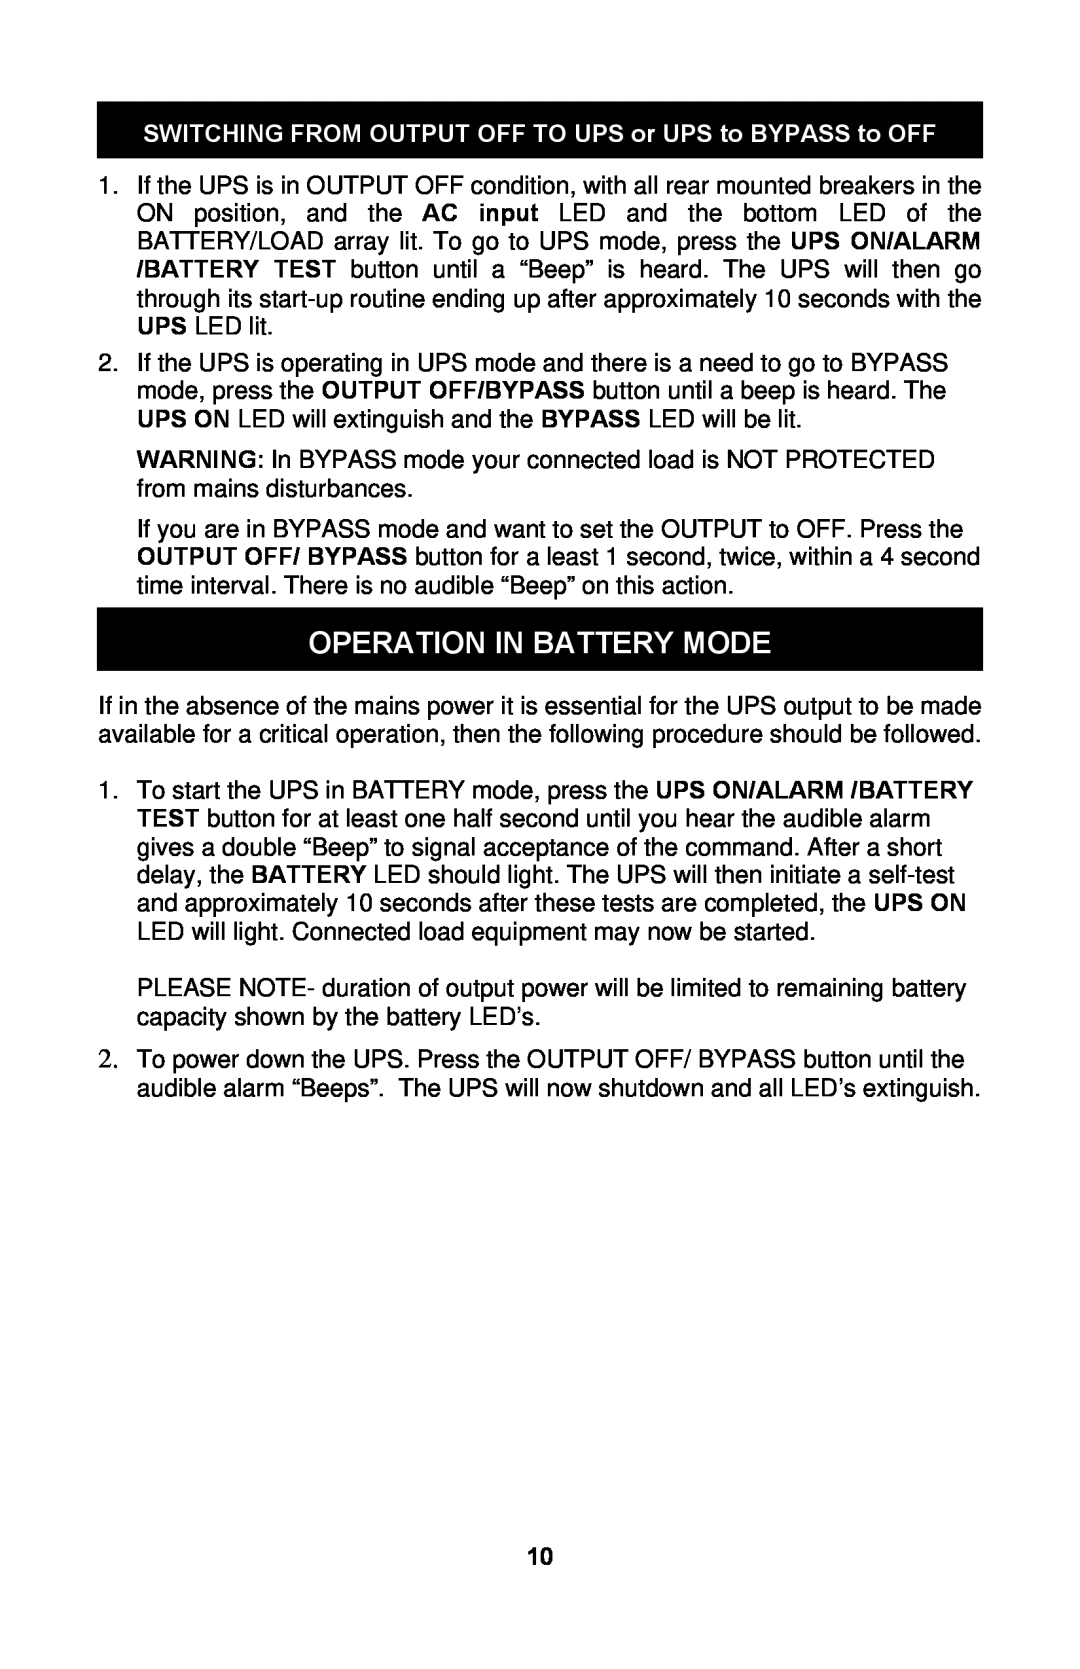 Liebert GXTTM user manual Operation In Battery Mode, SWITCHING FROM OUTPUT OFF TO UPS or UPS to BYPASS to OFF 